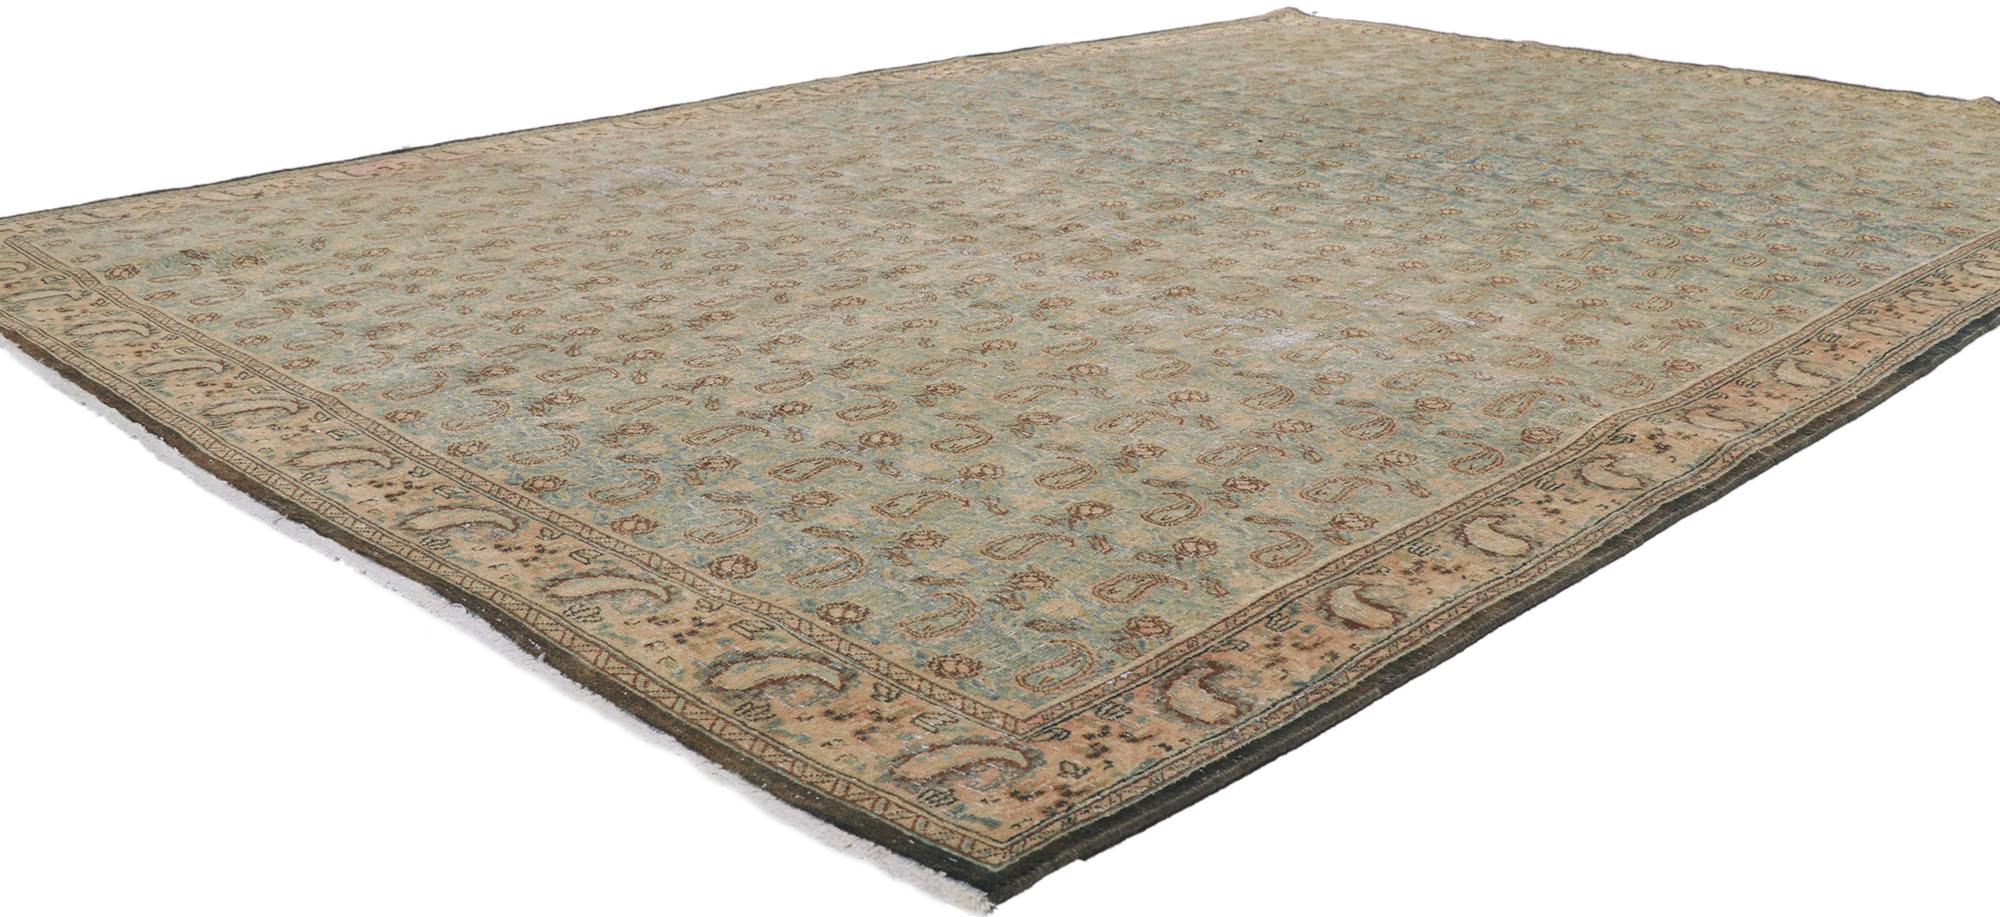 61004 Distressed Vintage Persian Qum Rug 06'09 x 09'05.

Abrash.
Hand-knotted wool.
Made in Iran.
Measures: 06'09 x 09'05.